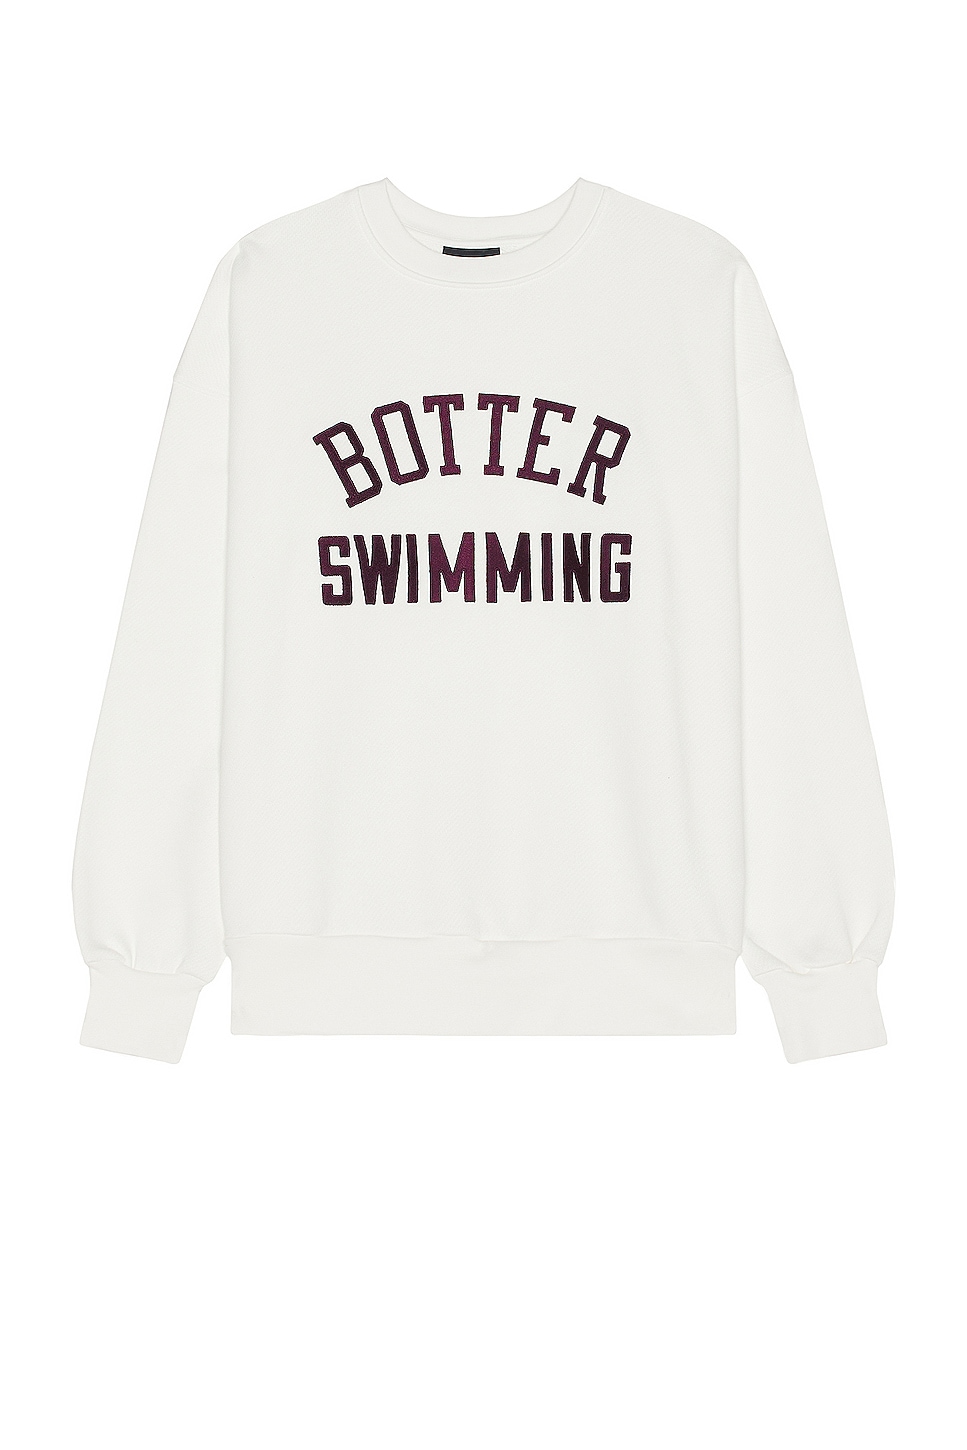 Image 1 of BOTTER Caribbean Couture Sweater in White